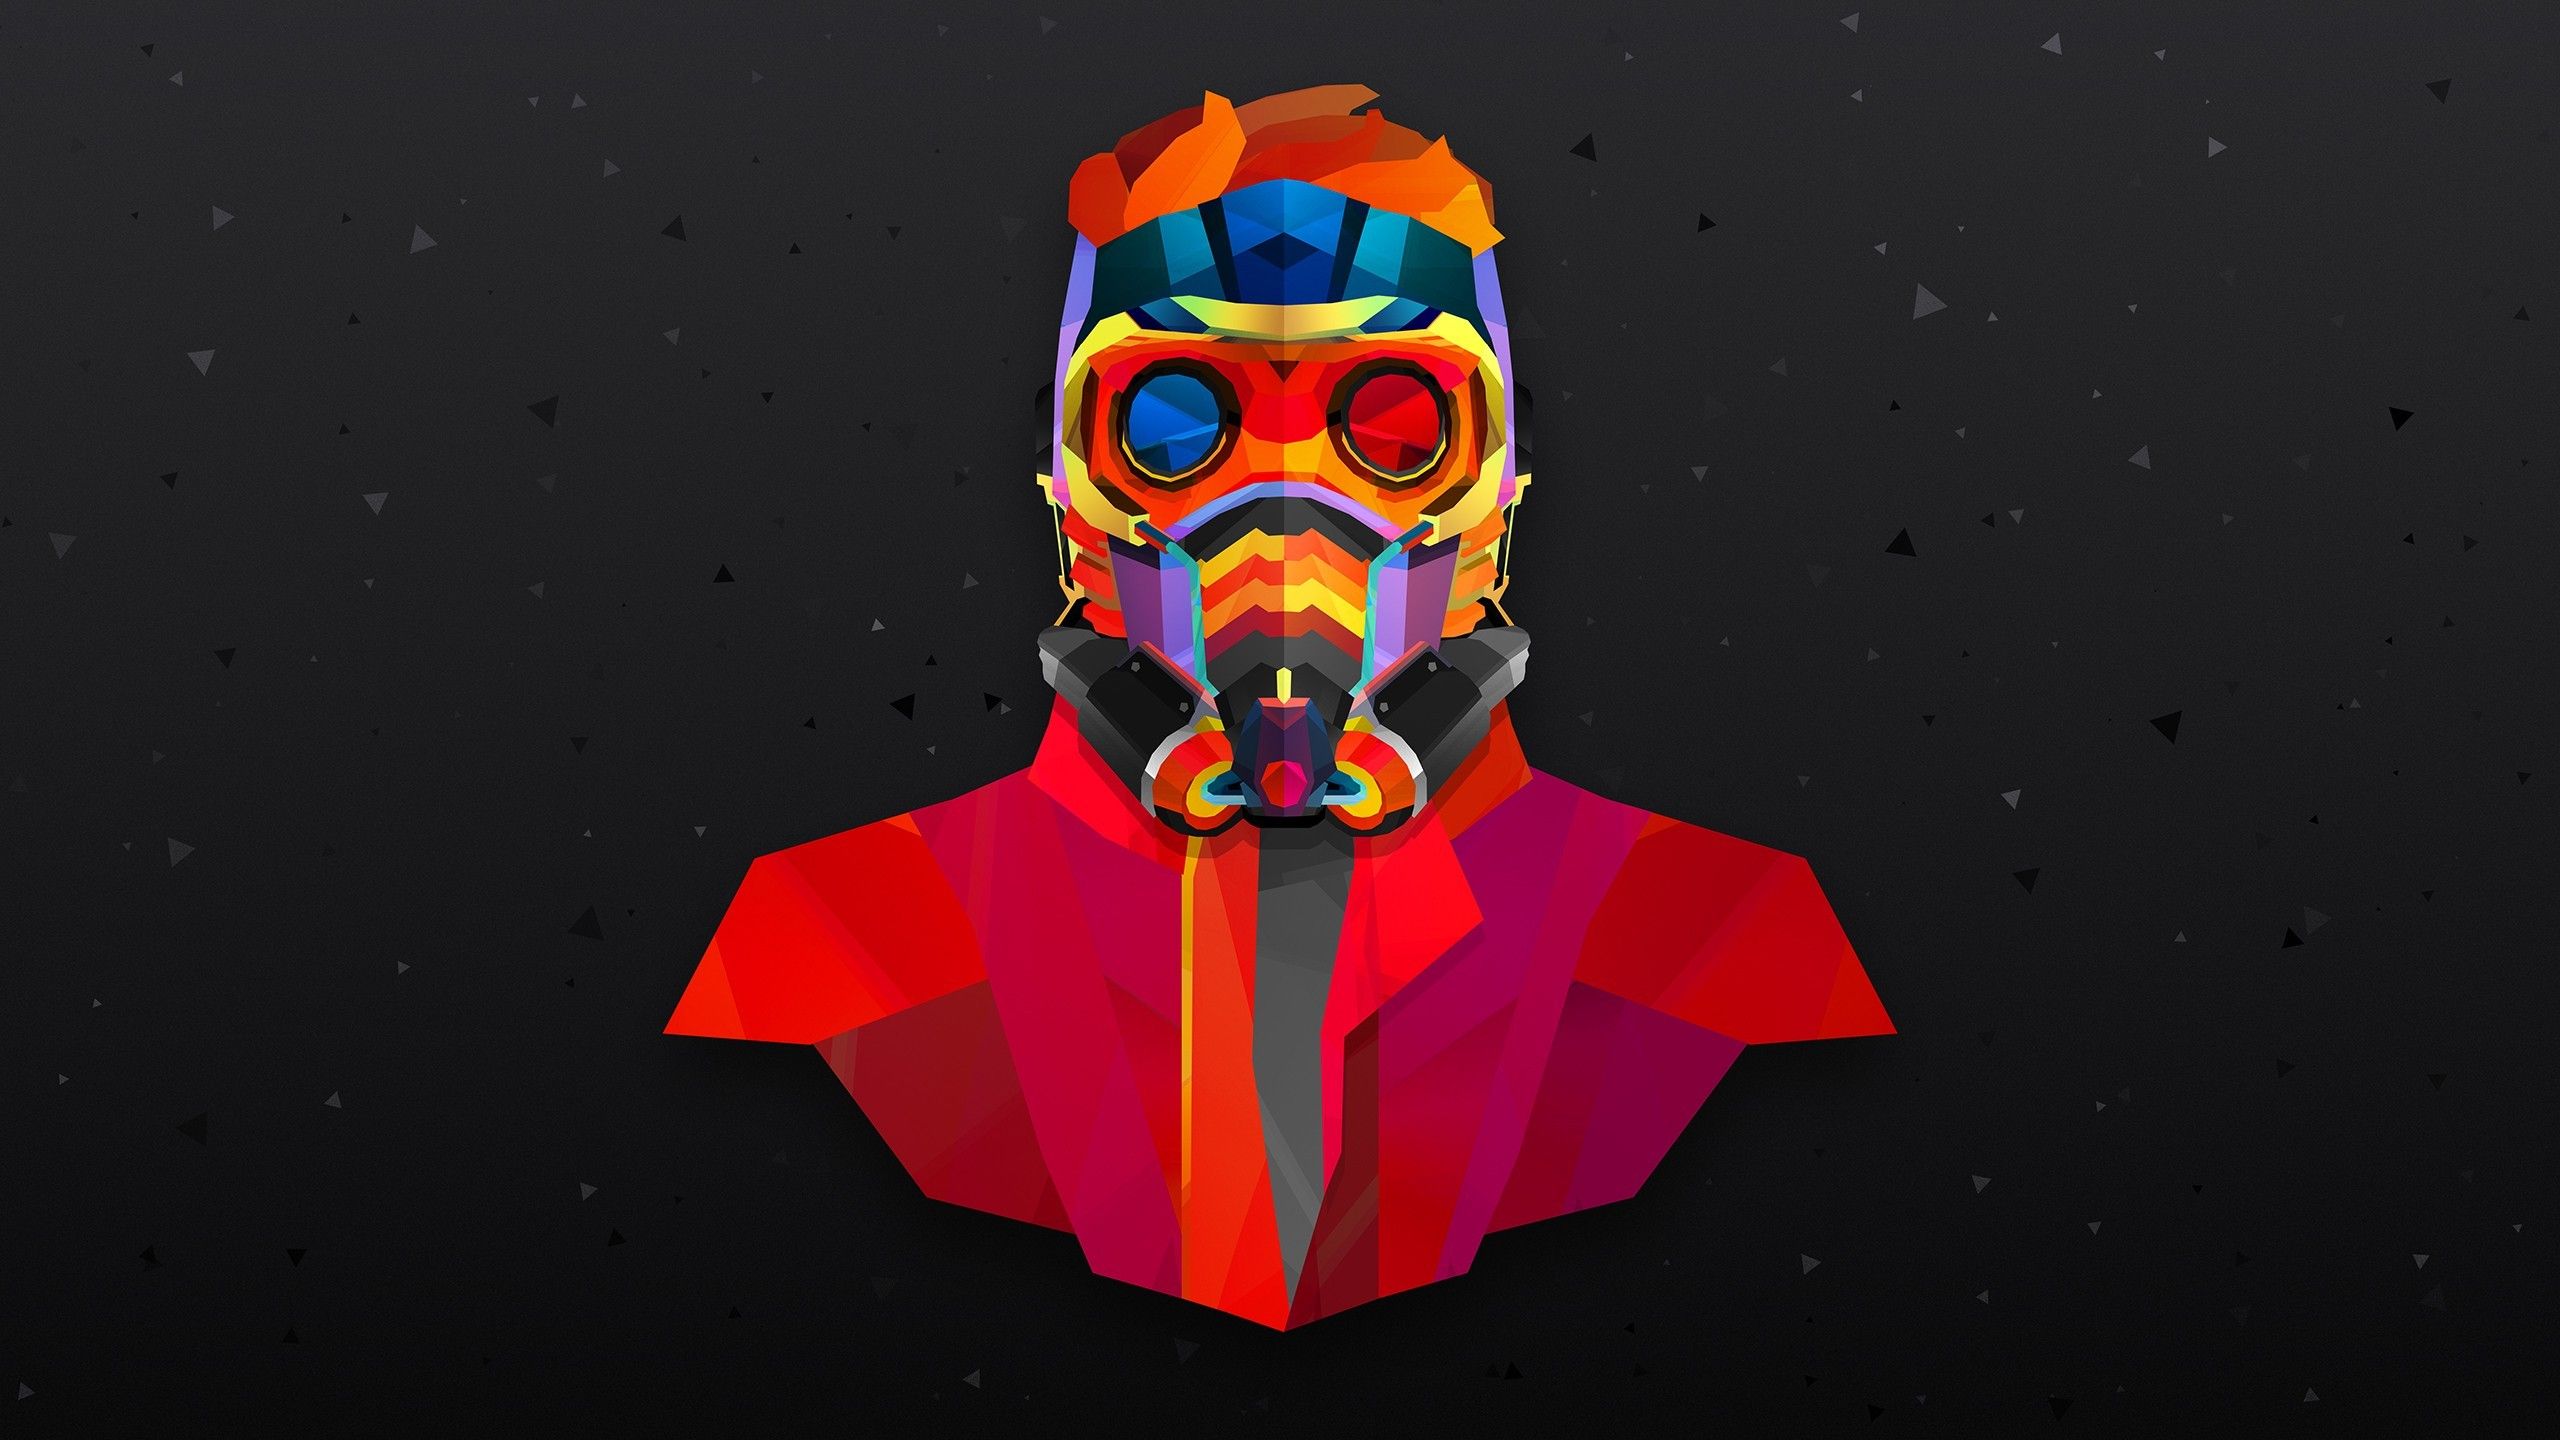 Starlord Background. Starlord Wallpaper, Starlord Background and